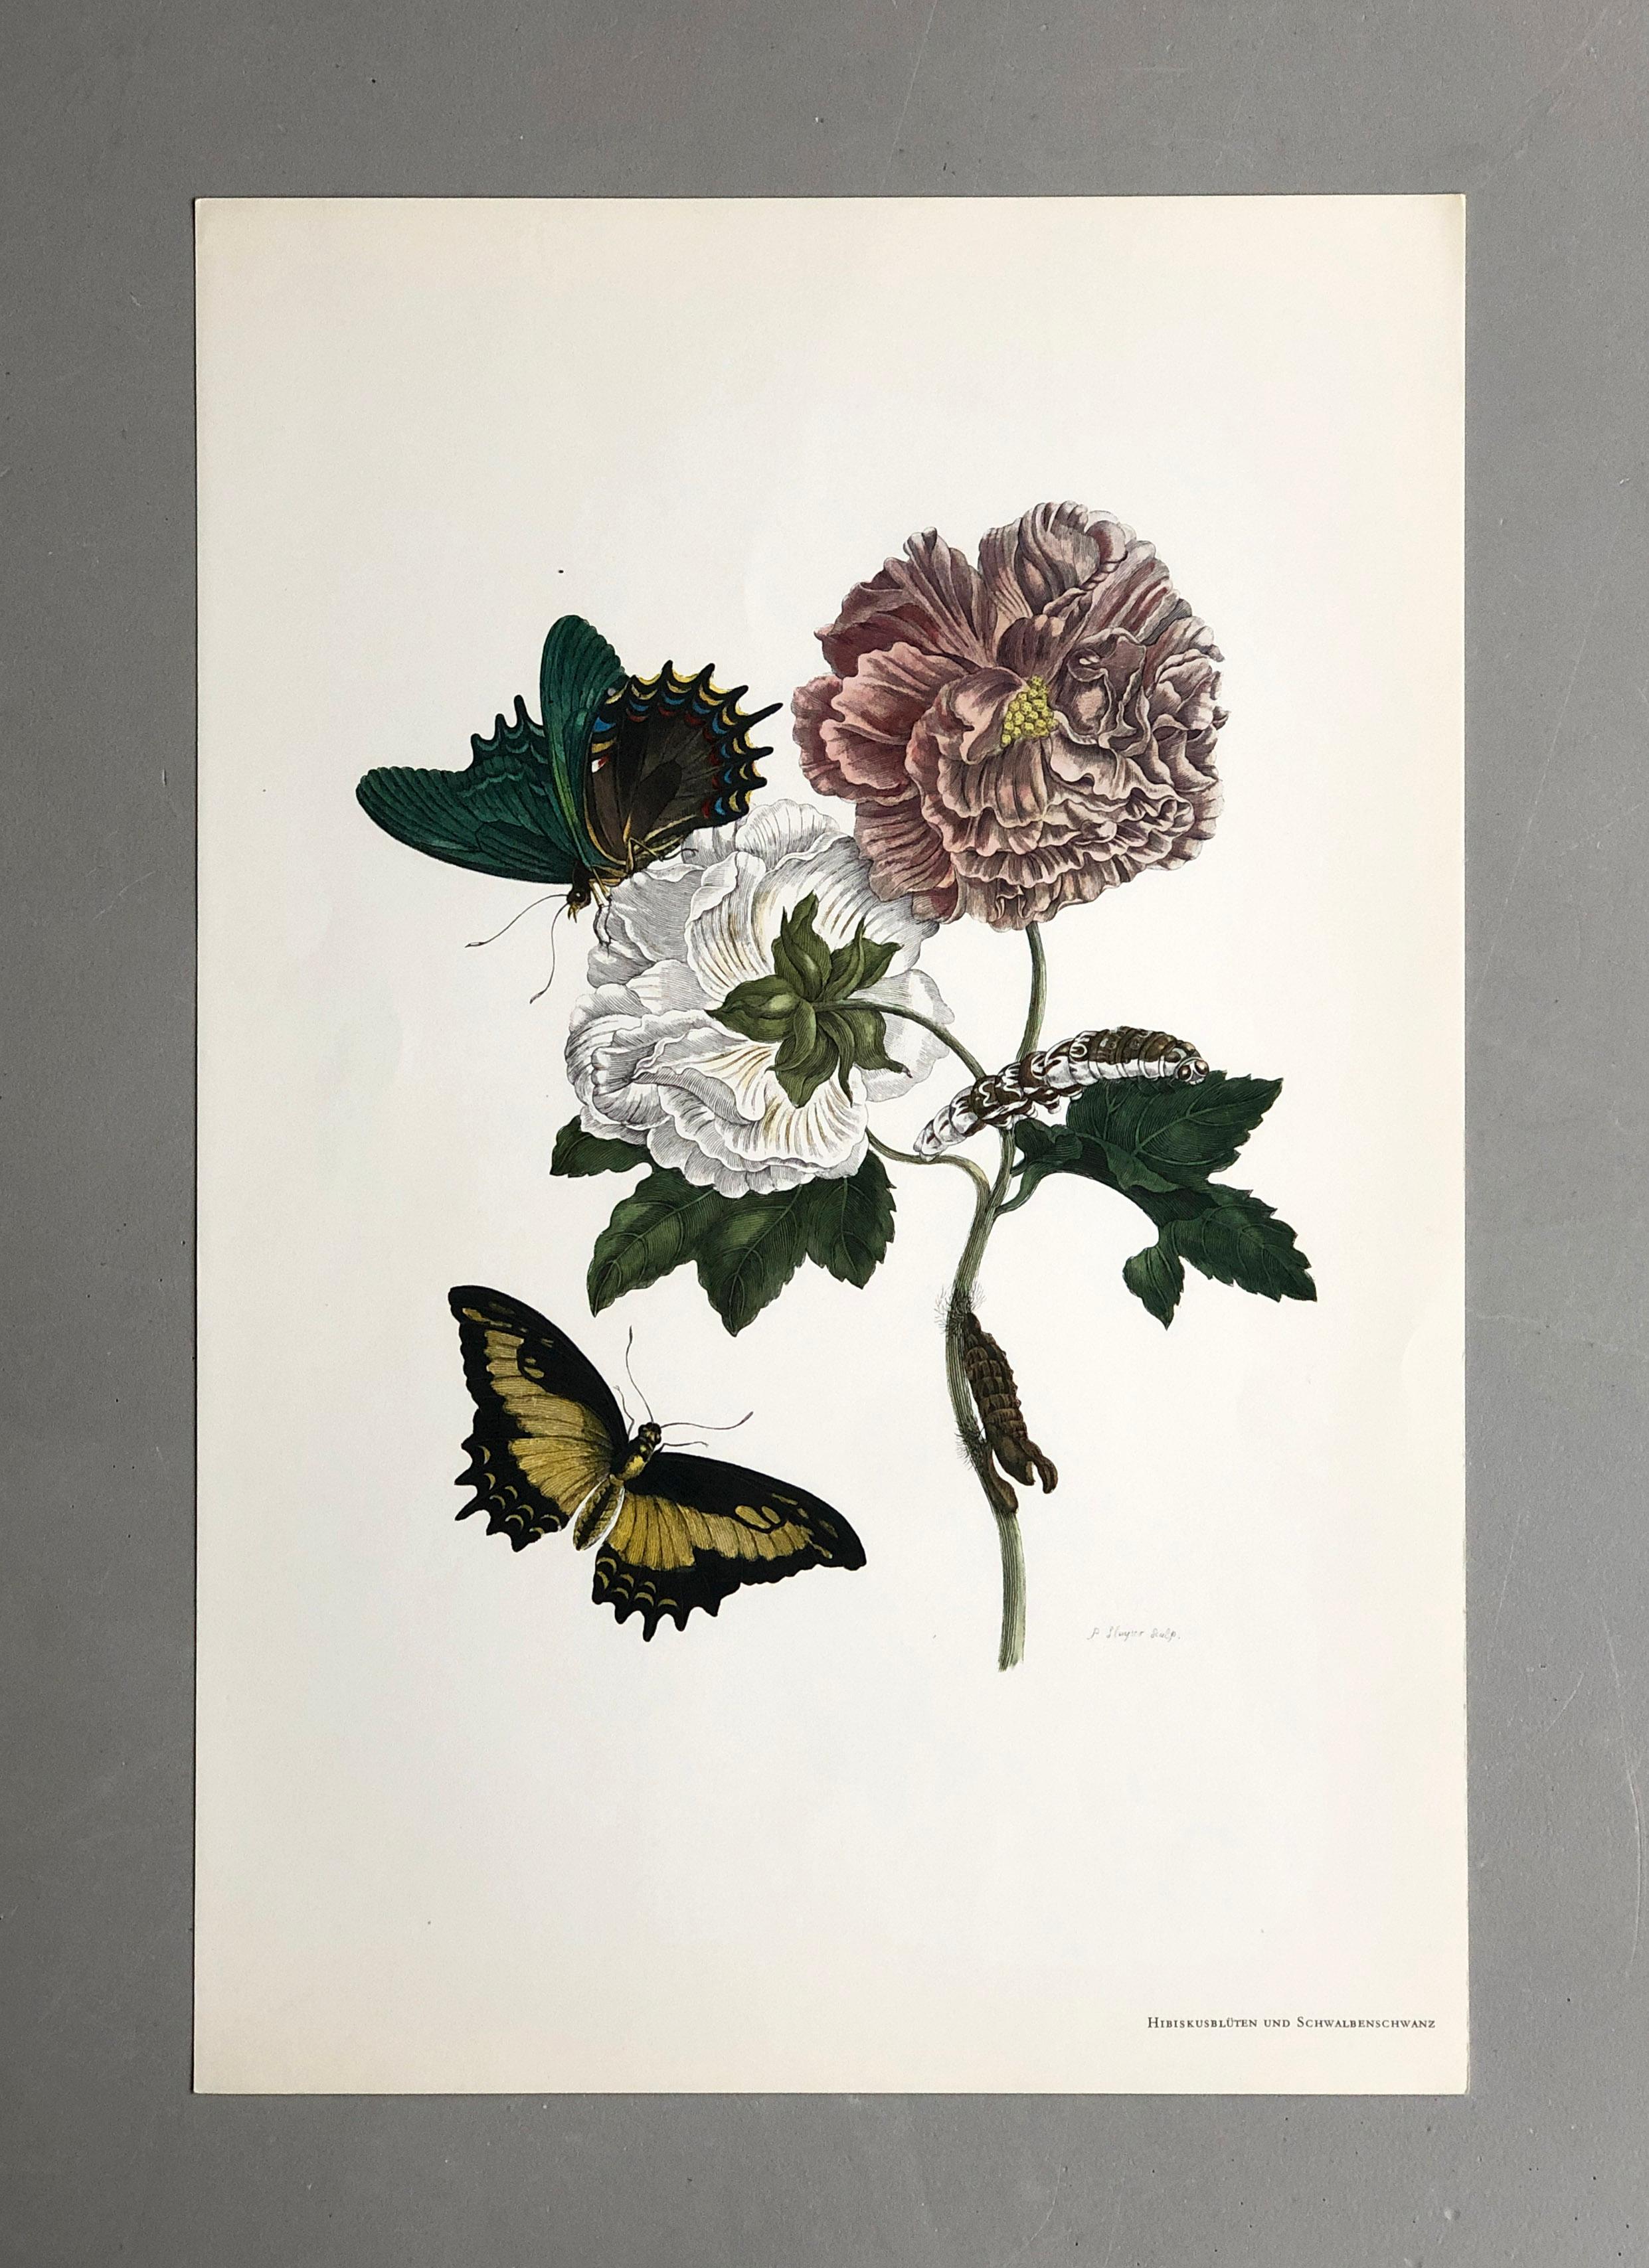 Maria Sibylla Merian - P. Sluyter - Hibiscus flowers and swallowtail Nr. 31 For Sale 4